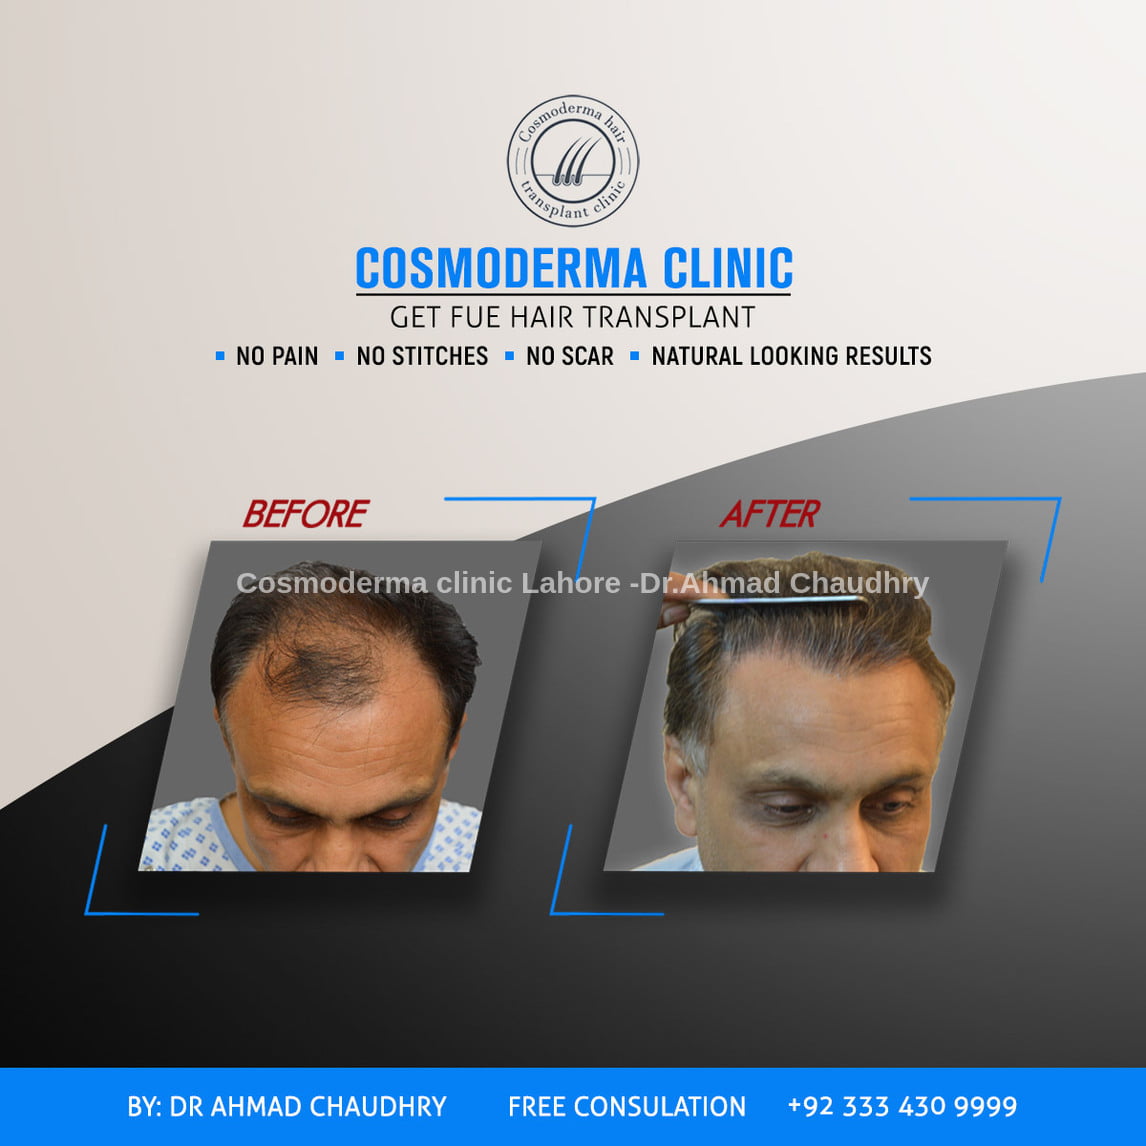 Cosmoderma-hair-transplant-clinic-results-Lahore